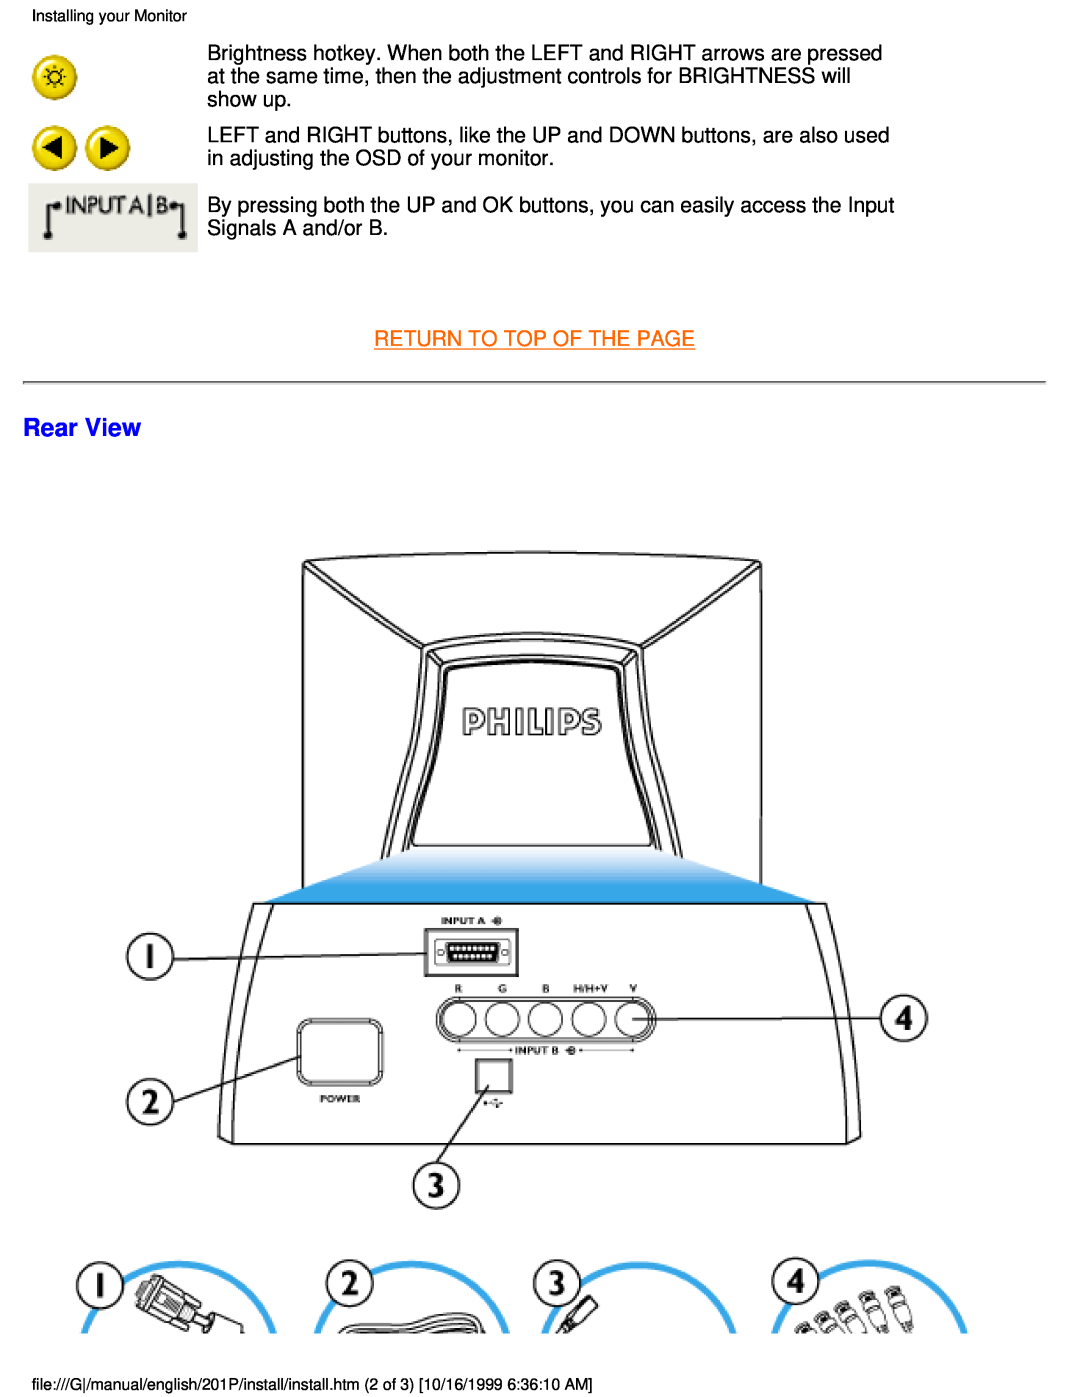 Philips 201P user manual Rear View, Return To Top Of The Page, Installing your Monitor 